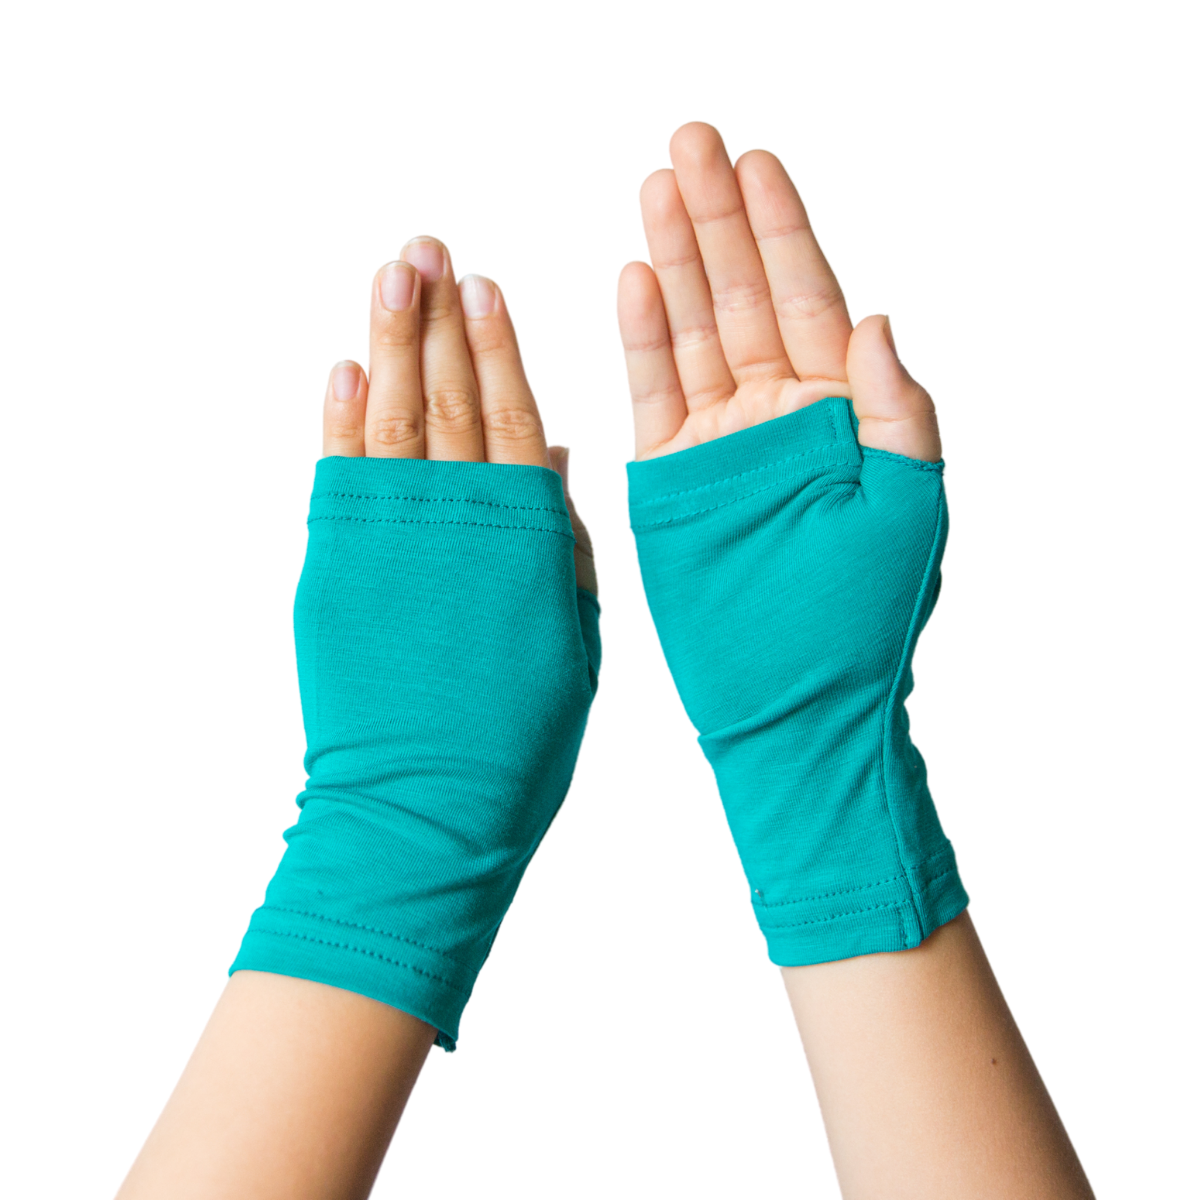 Two child hands wearing teal Remedywear fingerless gloves.